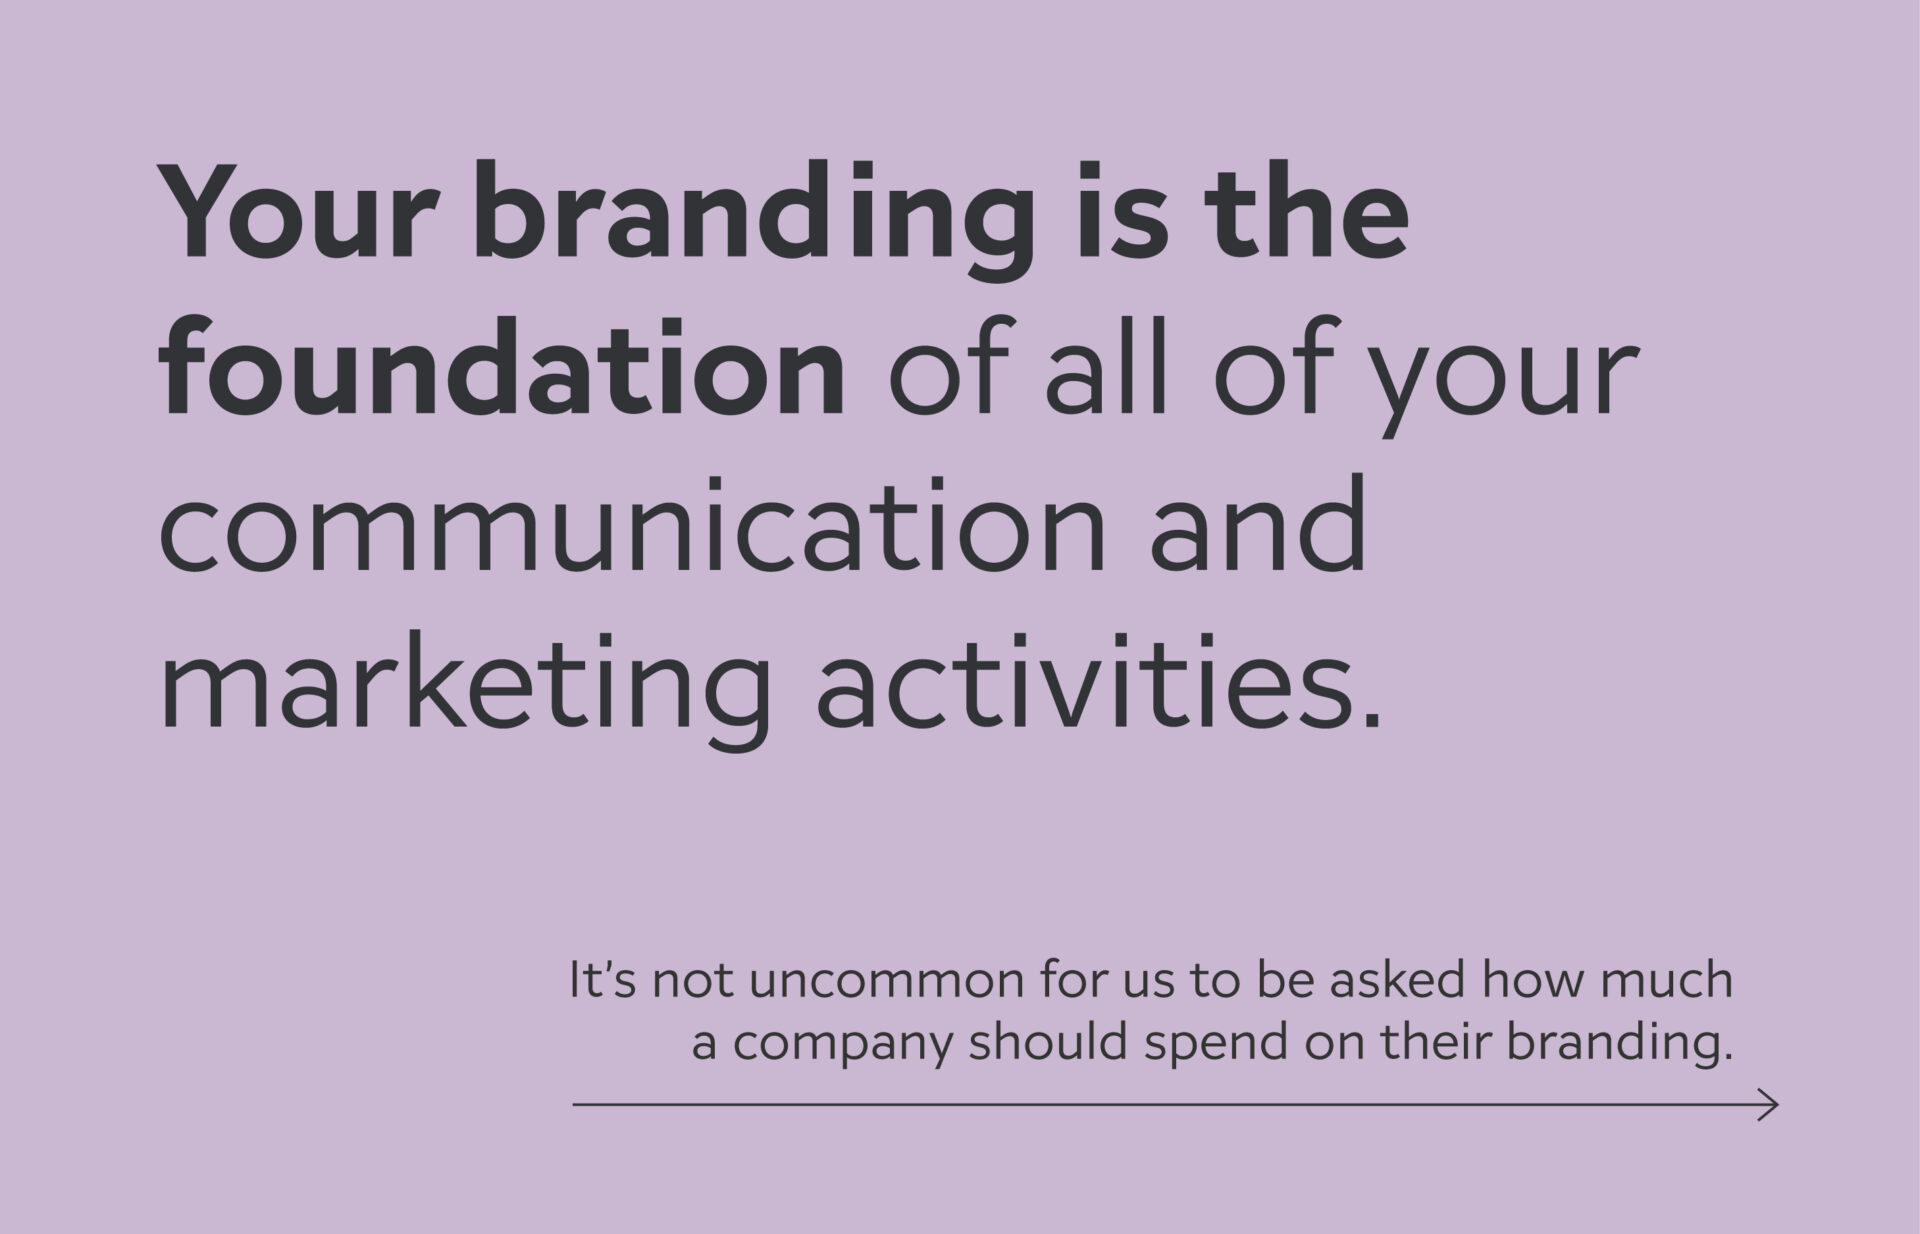 Your branding is the foundation of all of your communication and marketing activities